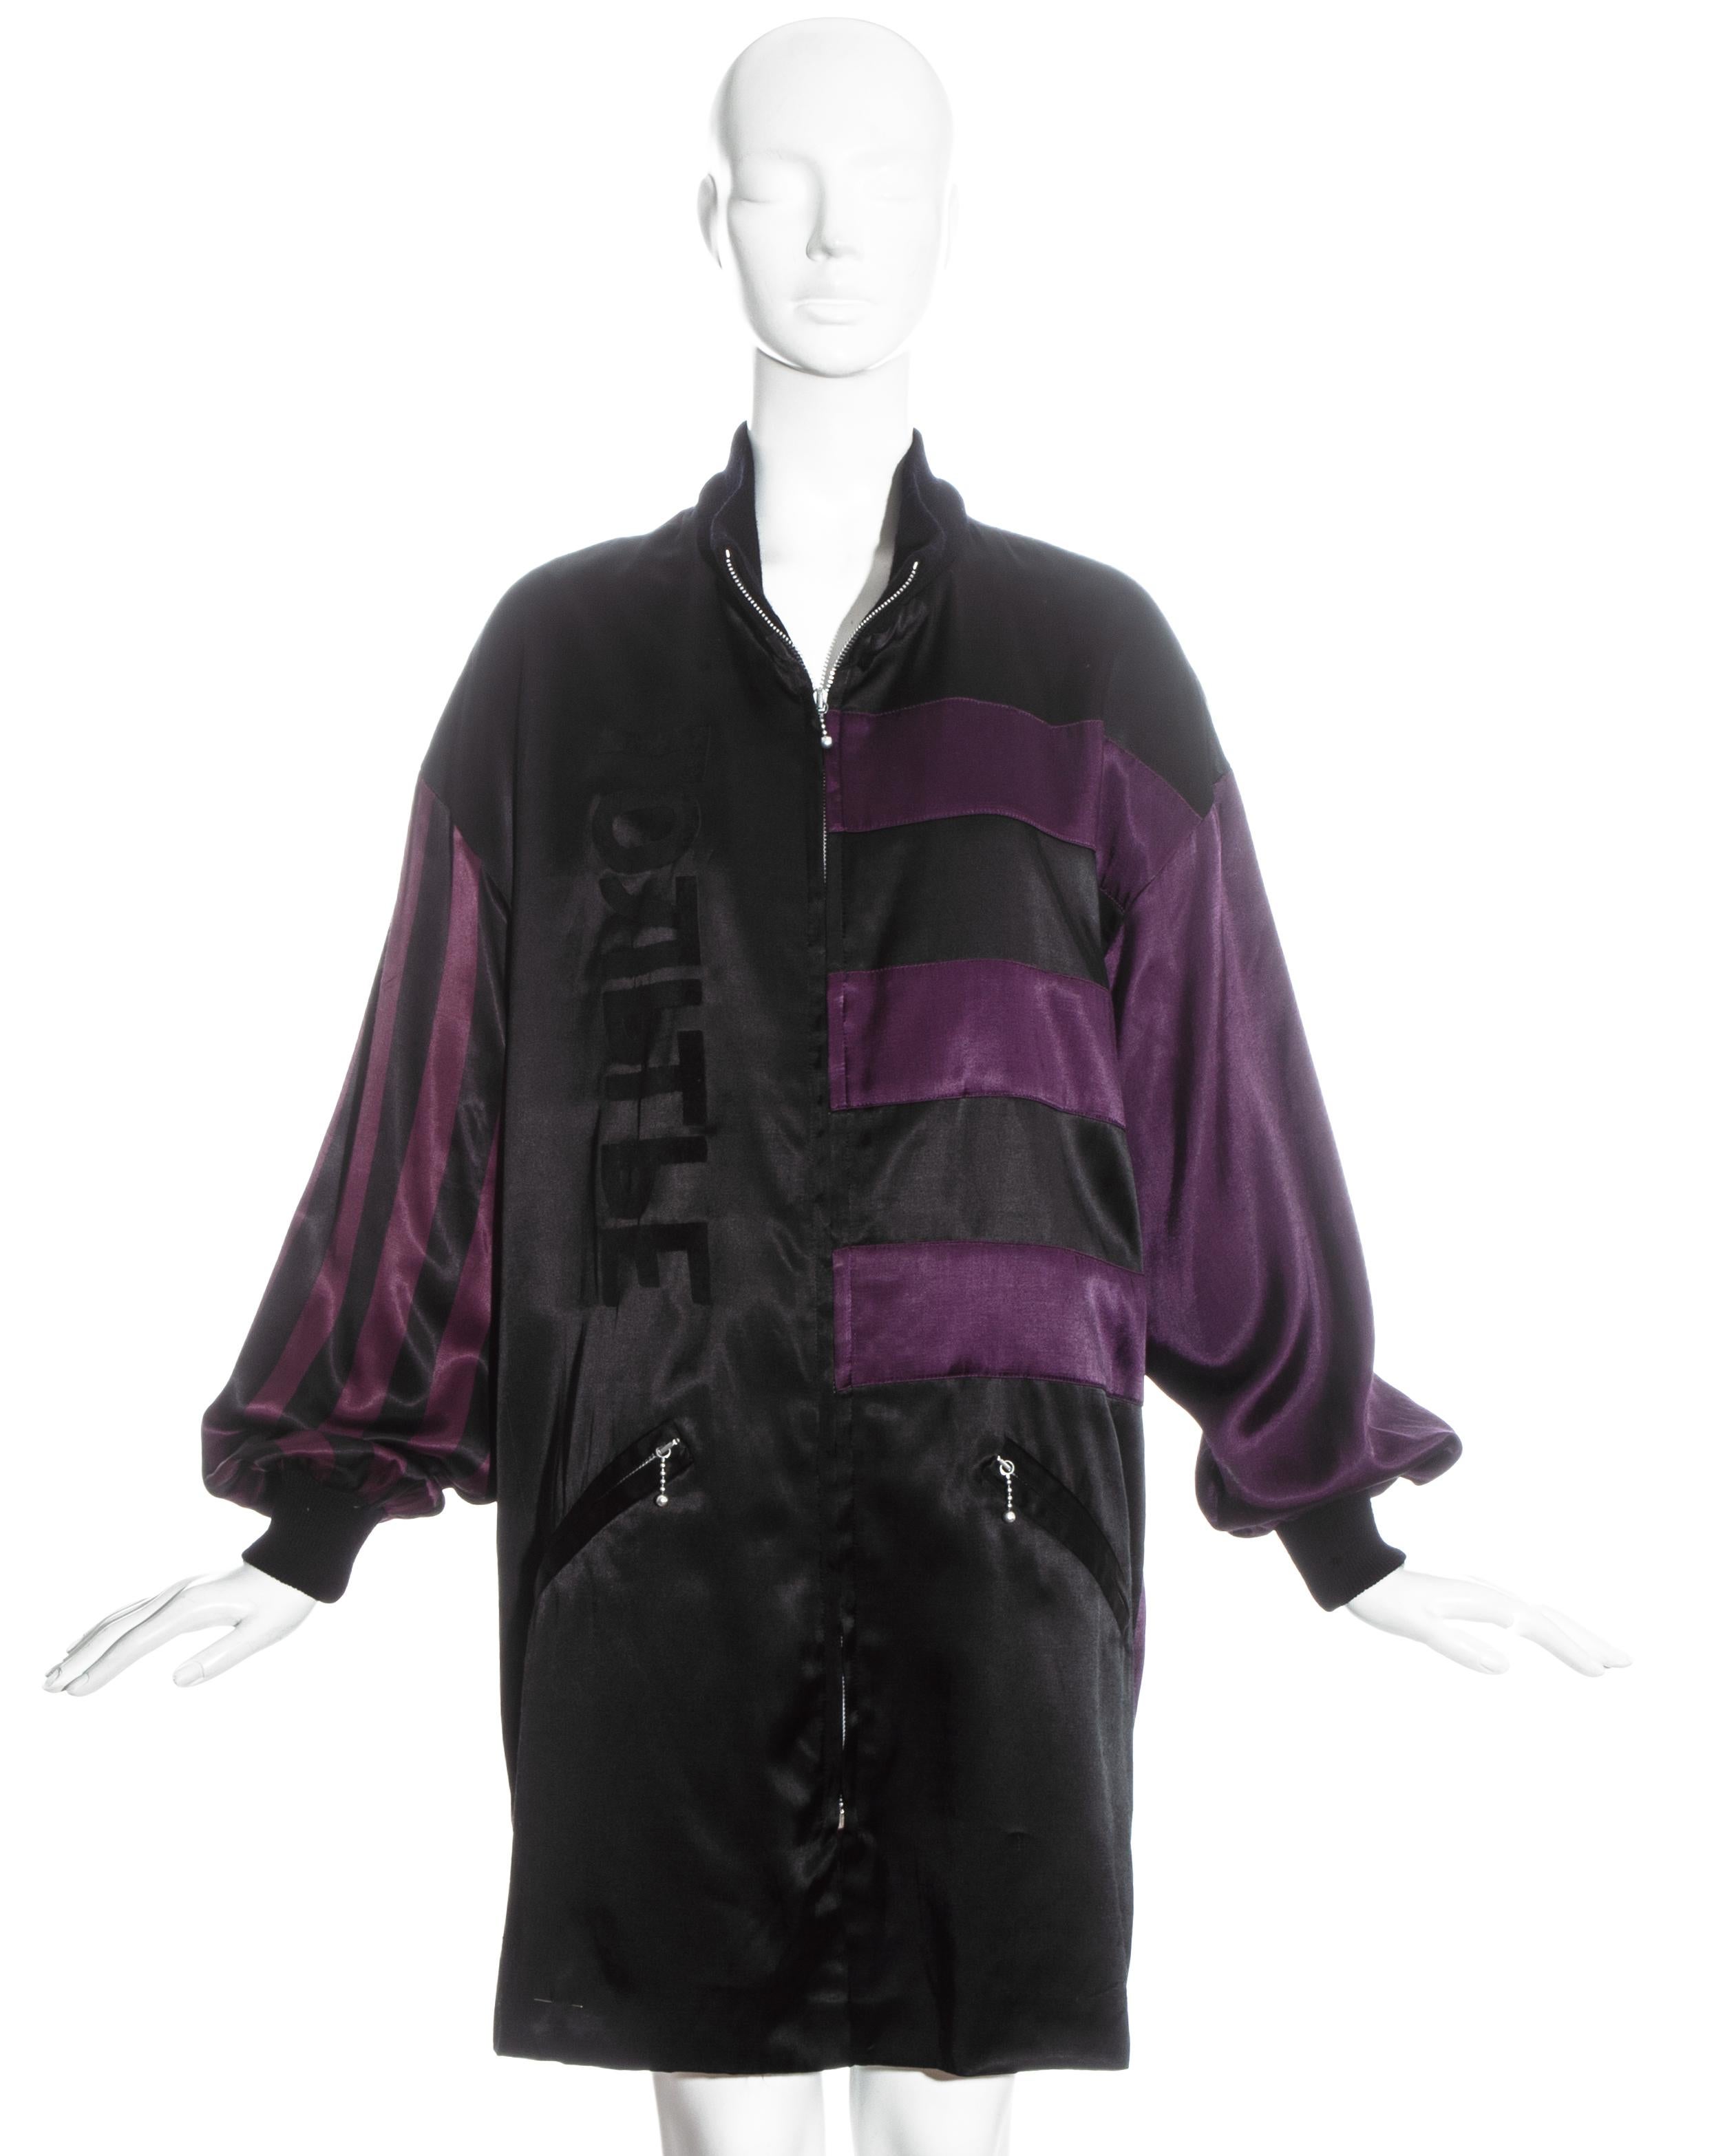 Jean Paul Gaultier purple and black striped satin oversized jacket with ribbed wool cuffs and collar, two front pockets and zip fastenings.

Fall-Winter 1986